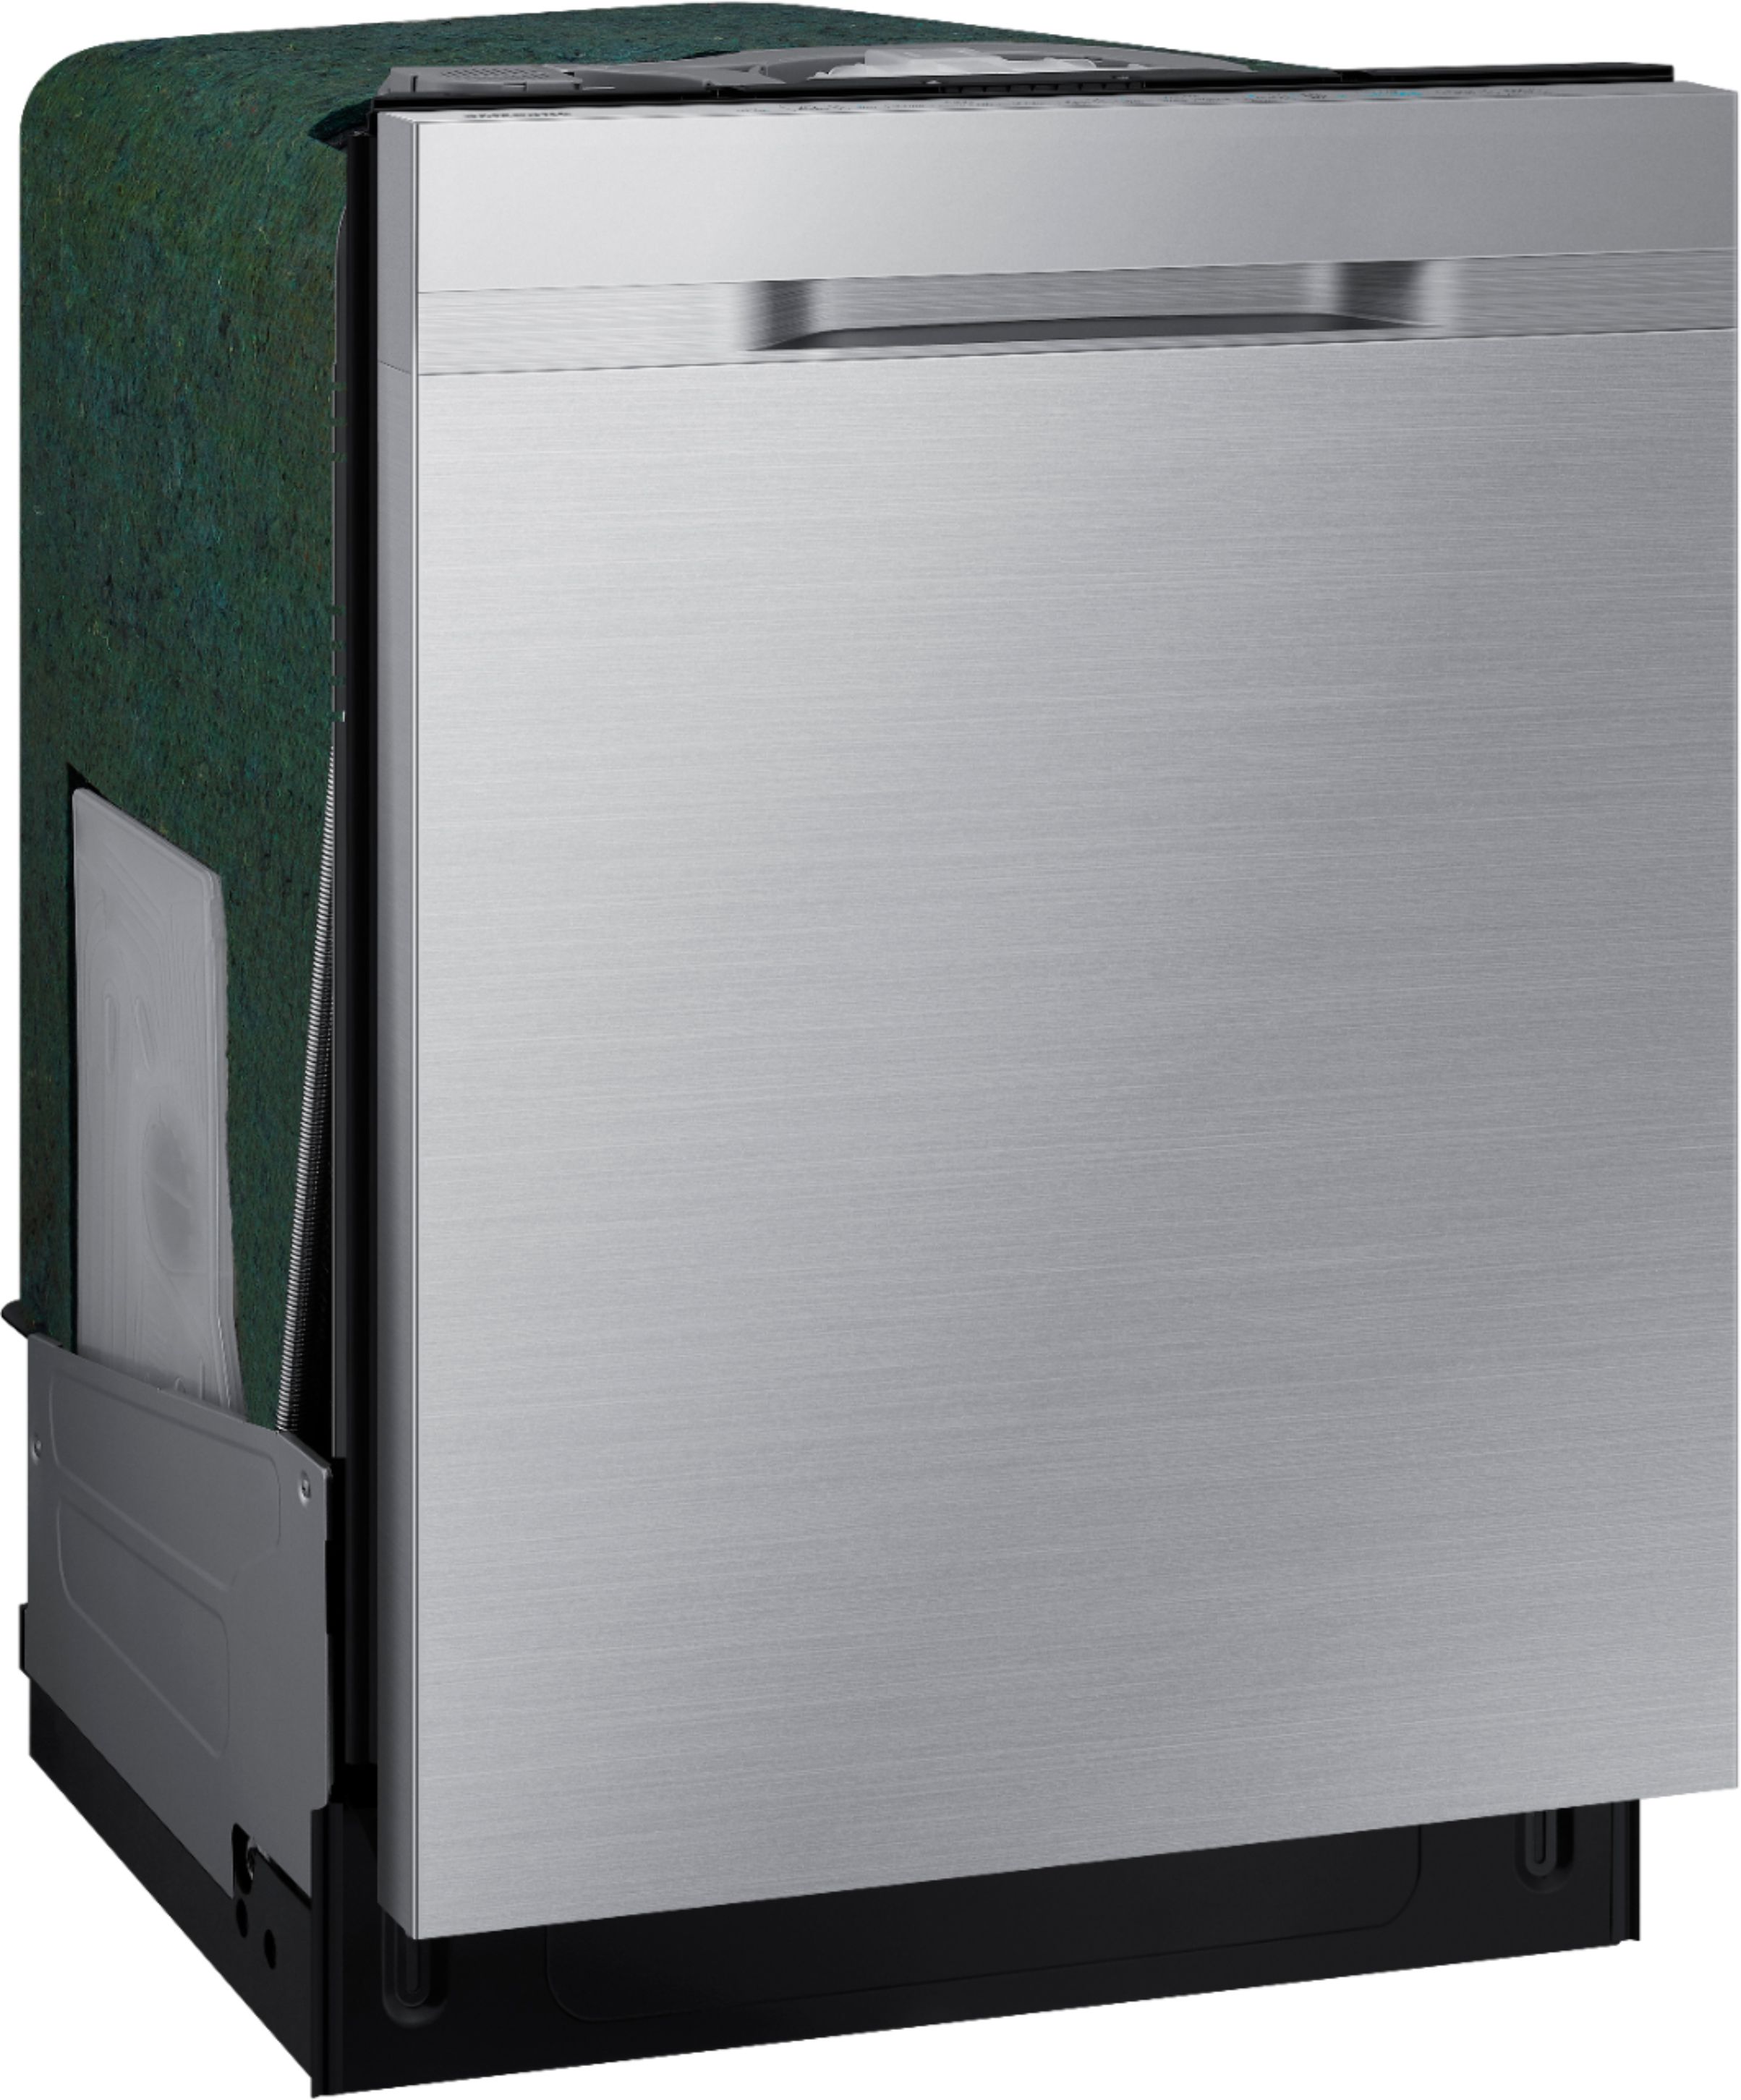 Angle View: GE - Top Control Built-In Dishwasher with Stainless Steel Tub, 48dBA - Black